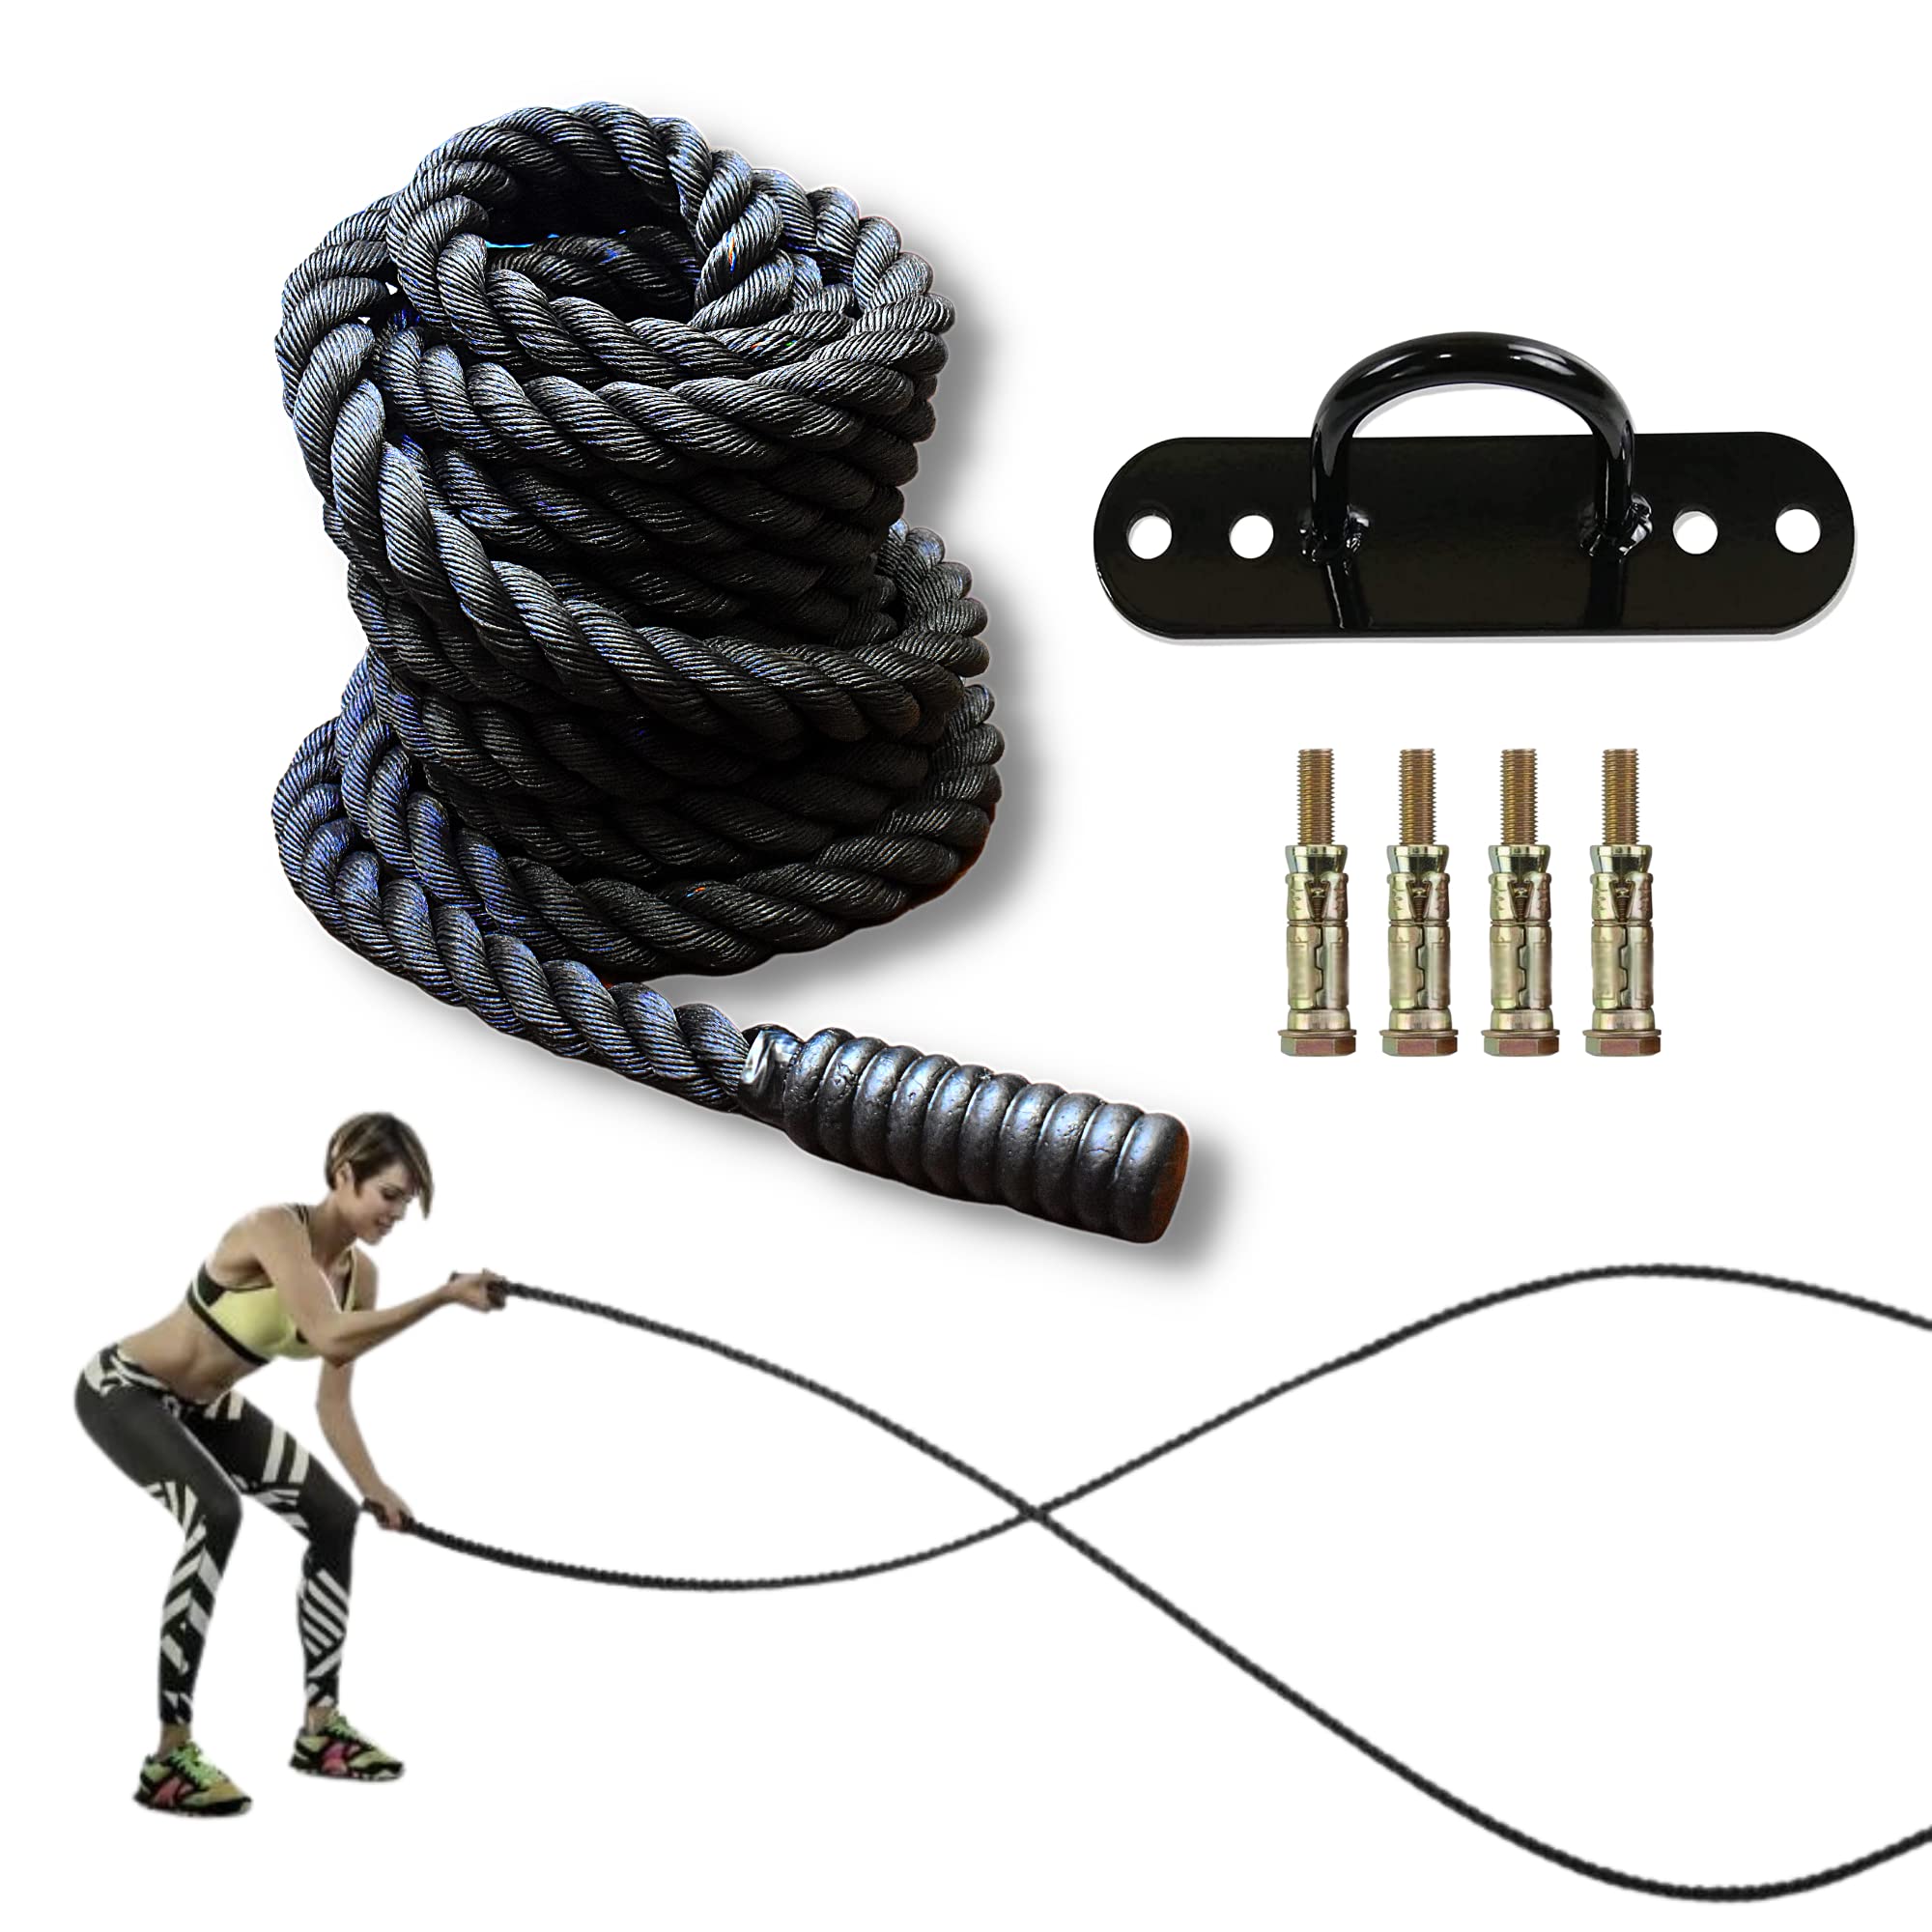 Hashtag Fitness Battle Rope for Gym Heavy Battle Rope for Strength Training  Home Fitness Exercise Rope,D Anchor Strap Included